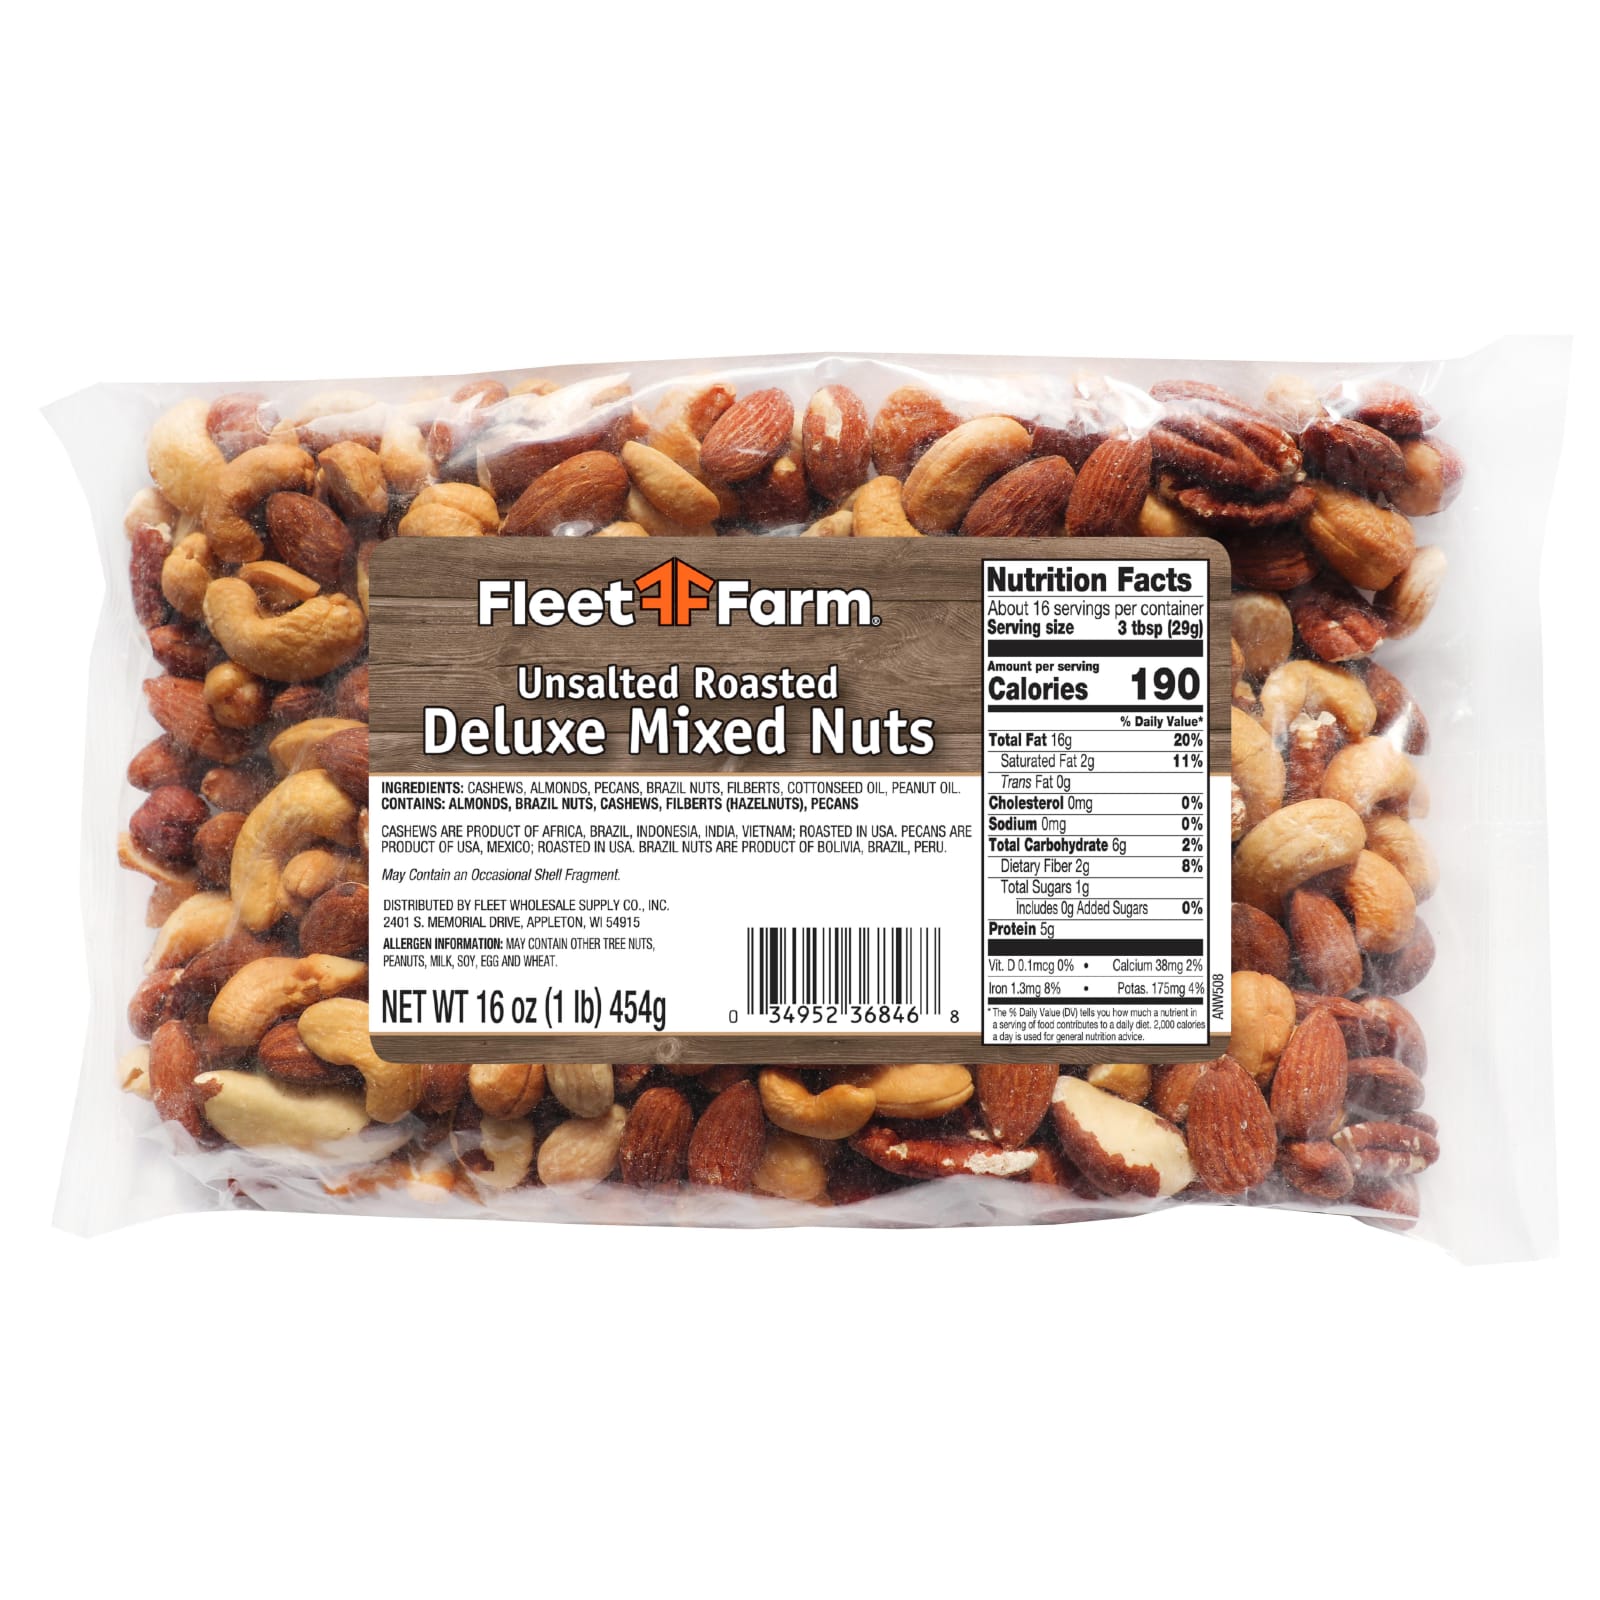 Deluxe Mixed Nuts - Unsalted (454g)